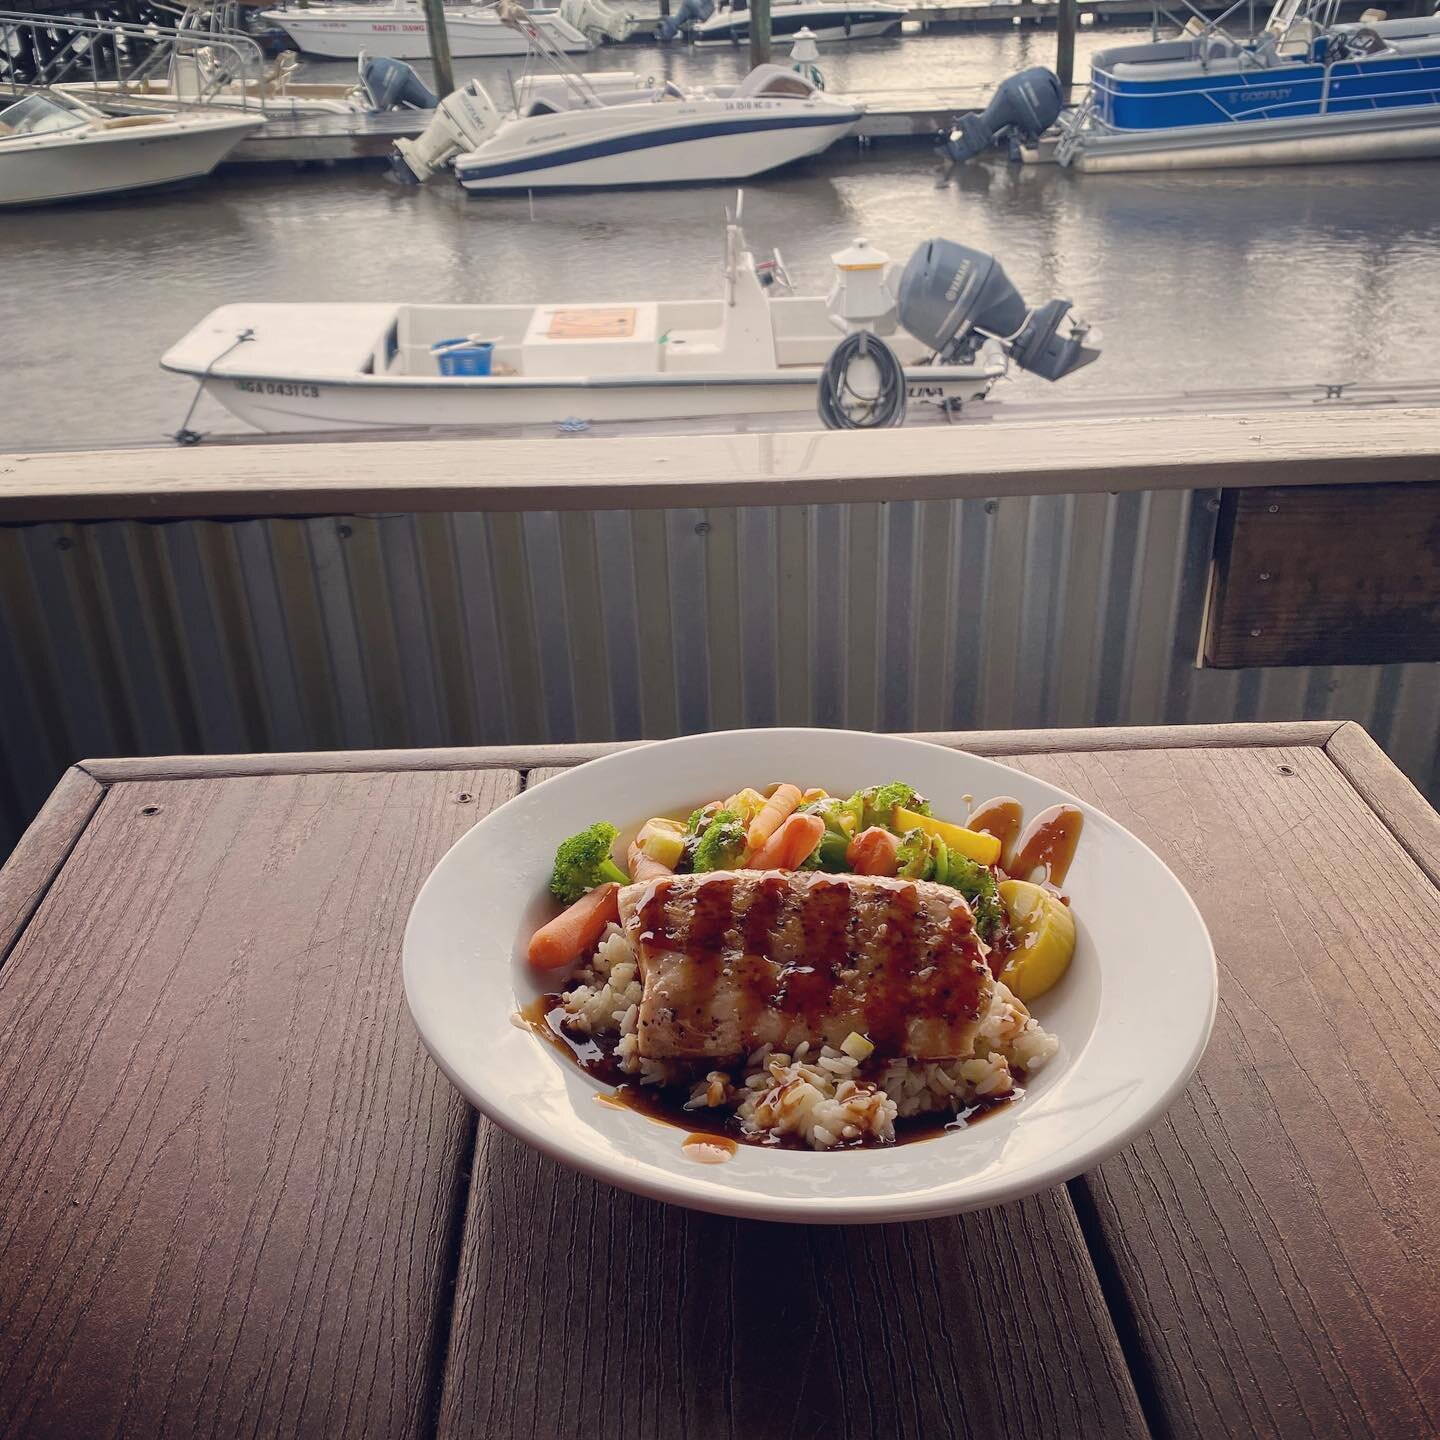 🚨 DINNER SPECIAL 🚨

Our fresh catch this week features grilled Mahi topped with a teriyaki glaze served over a medley of rice and apple pineapple pico🤤 also comes with a side of fresh veggies! 

#fishtalesrh #richmondhill #savannah #coastalgeorgia